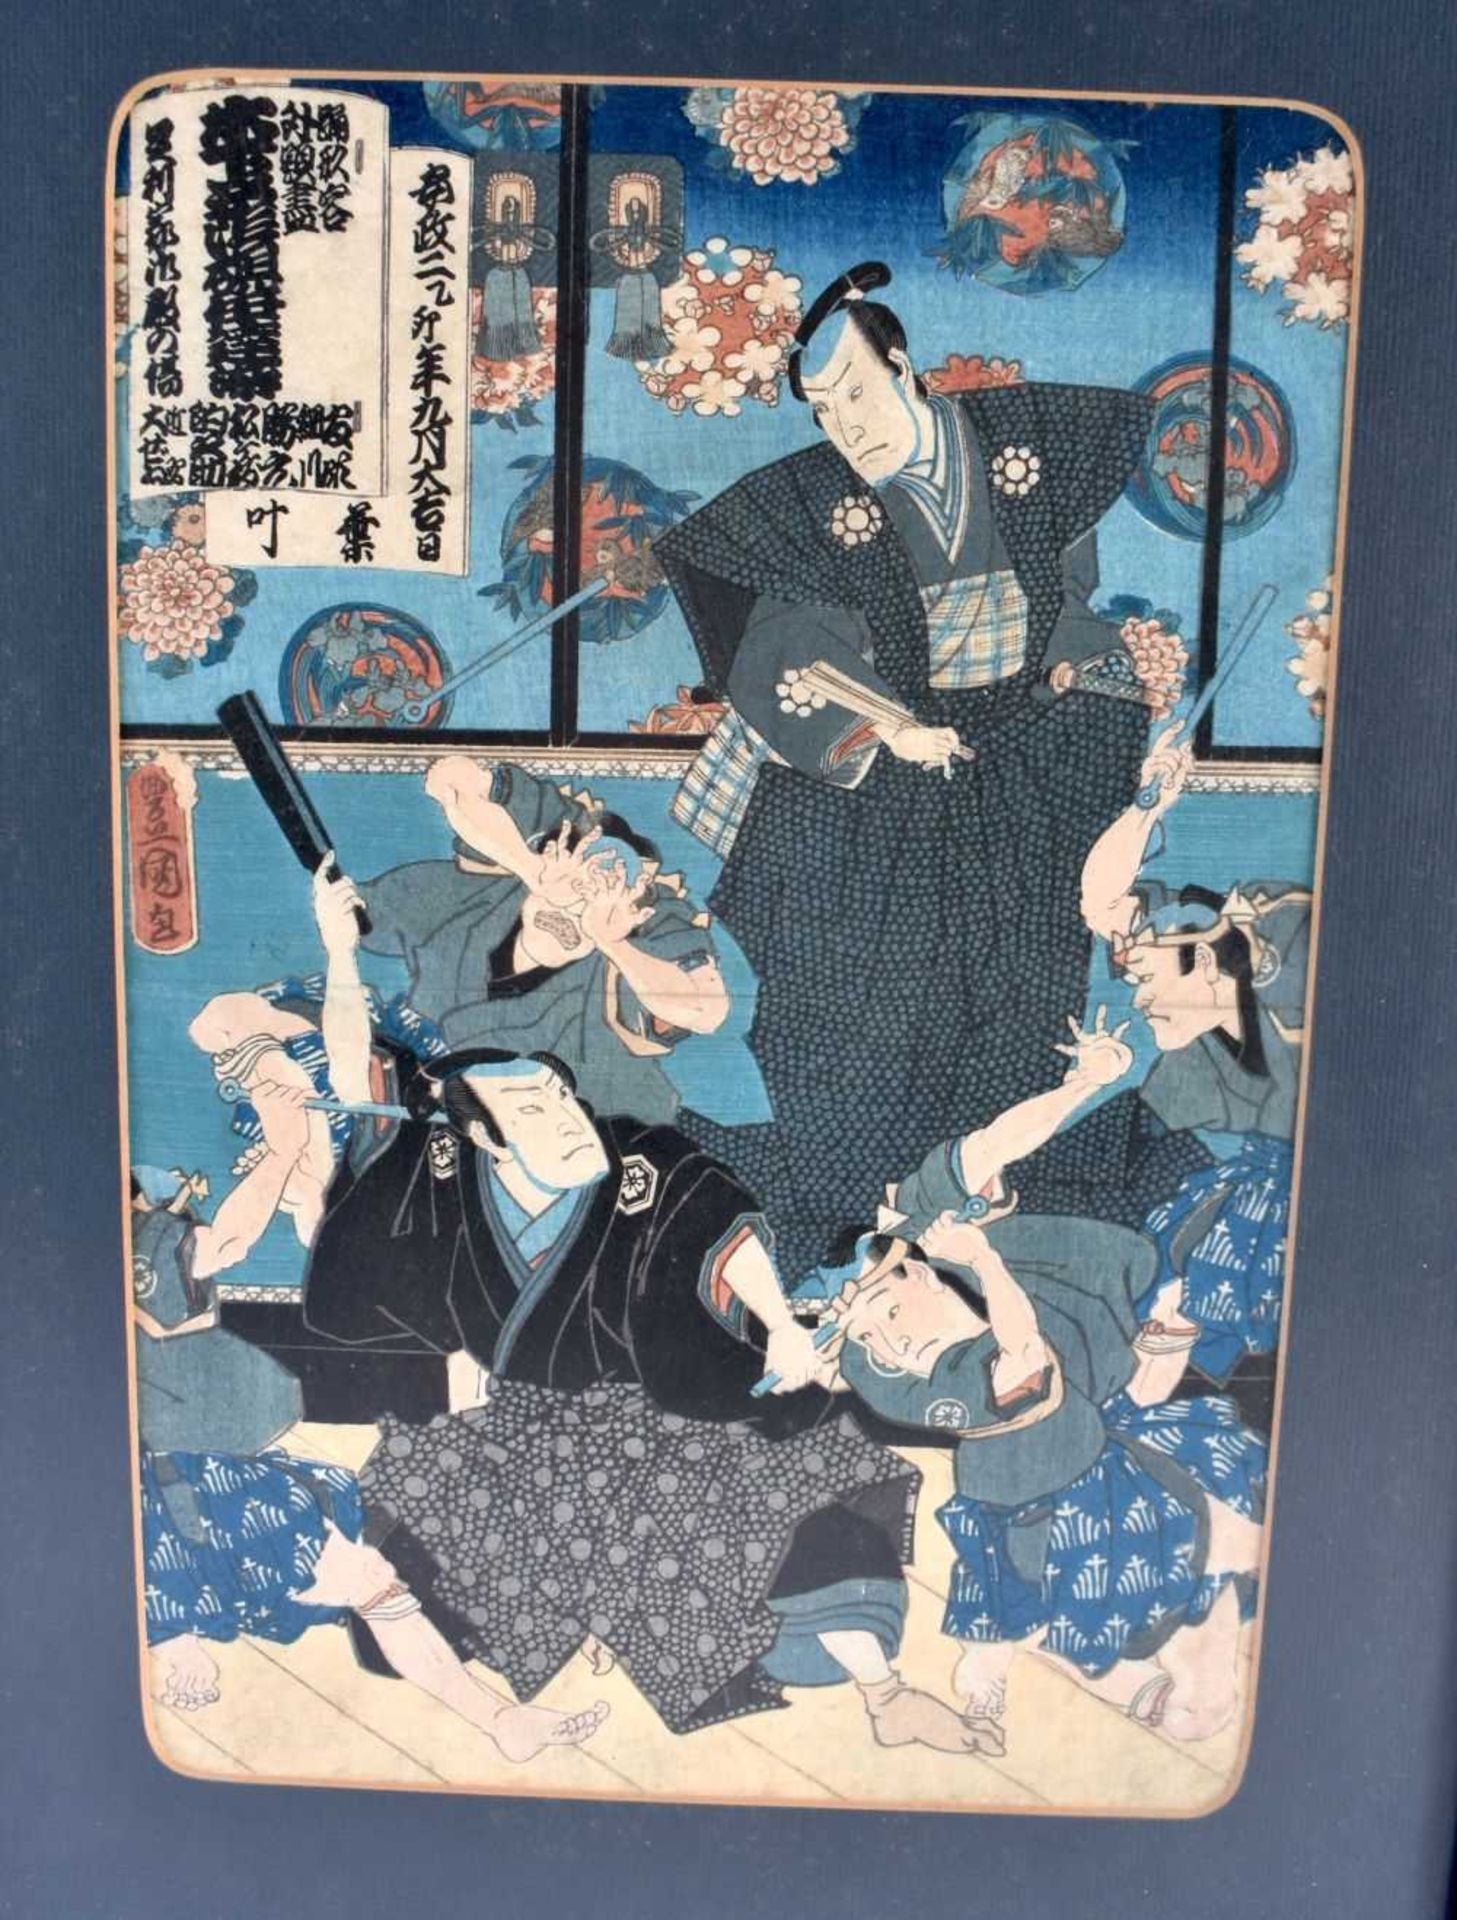 A 19TH CENTURY JAPANESE MEIJI PERIOD WOODBLOCK PRINT by Toko Yunii. 48 cm x 34 cm. - Image 2 of 5